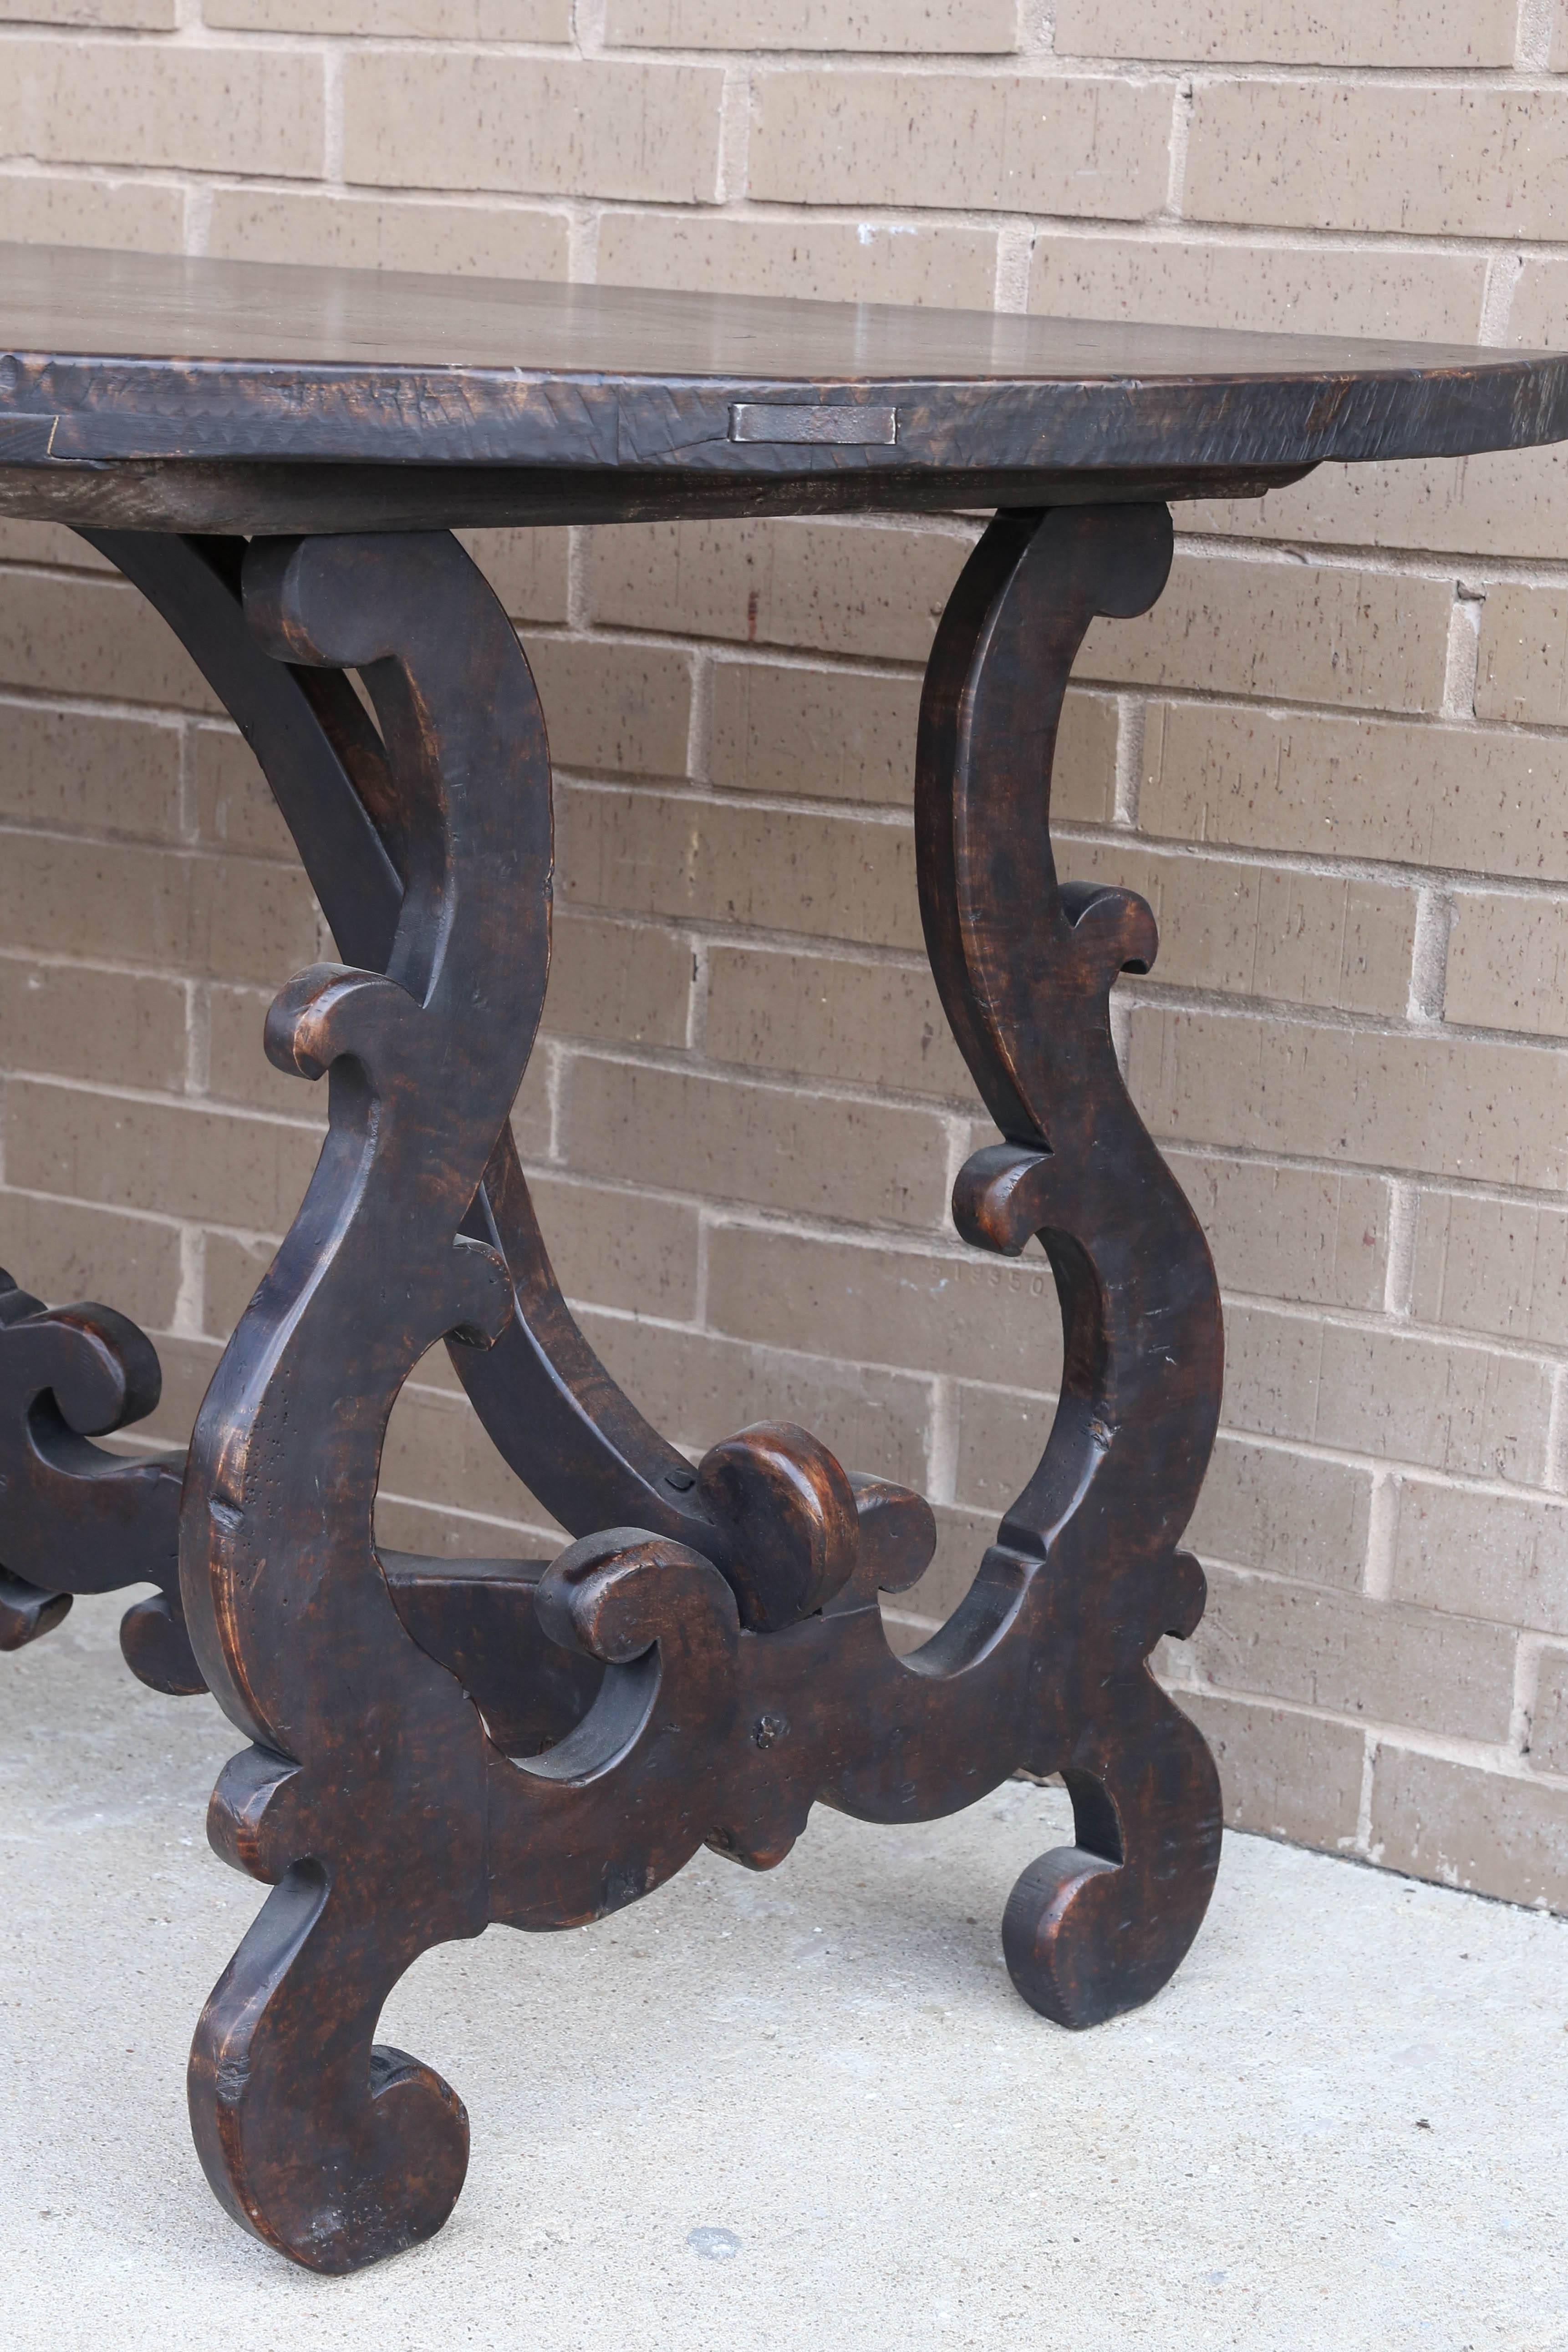 This elegant walnut demilune table is from Italy and makes a statement with its rich dark wood. (Only one available).